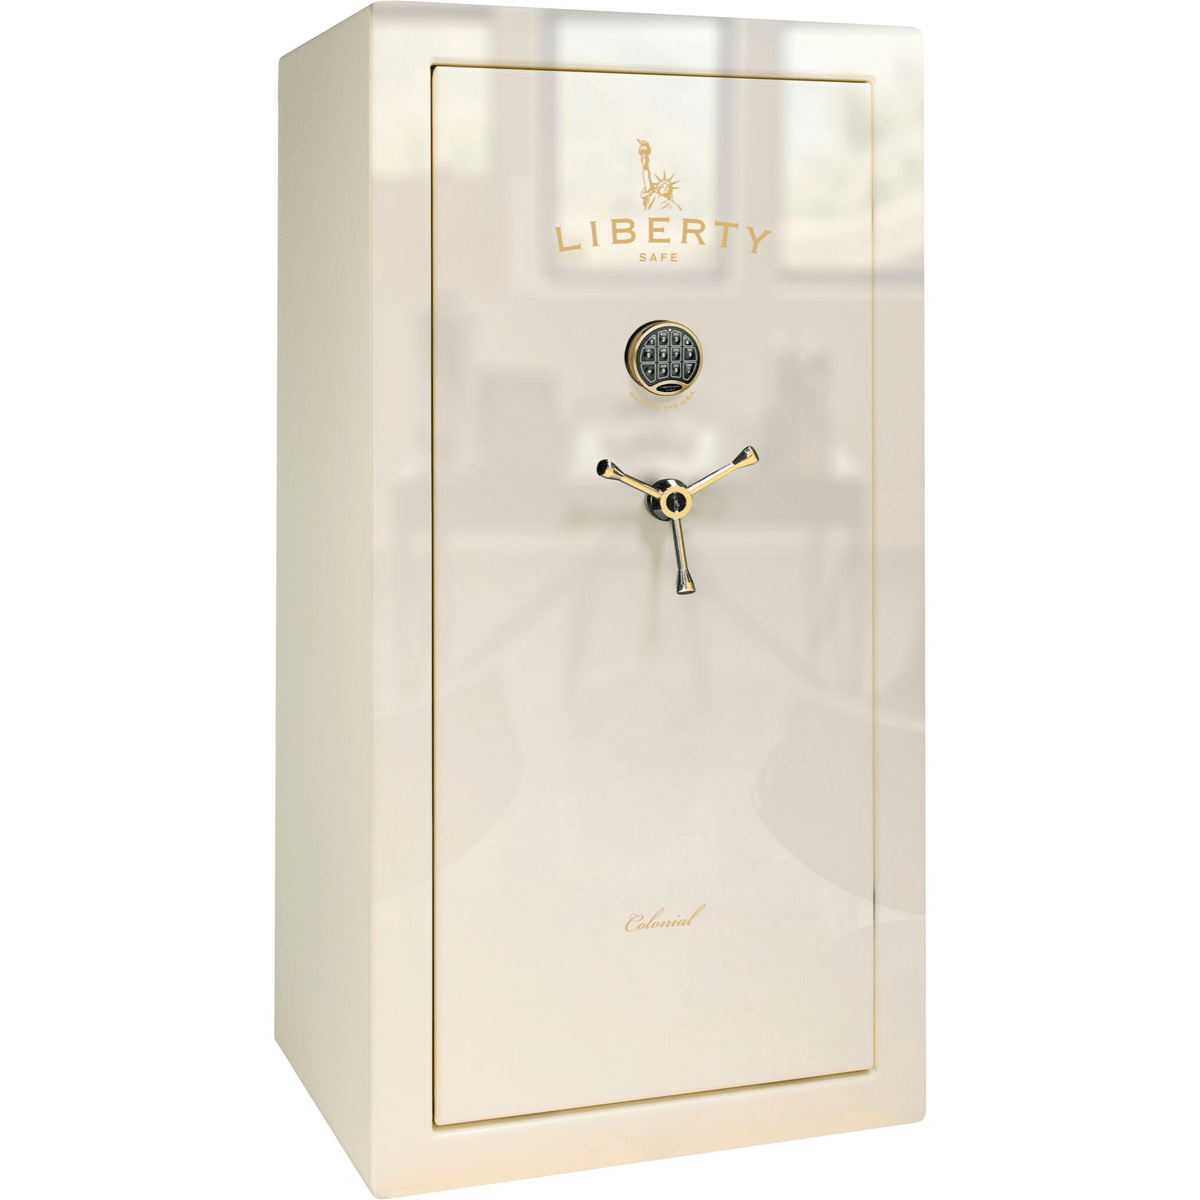 Liberty Colonial 23 Safe in White Gloss with Brass Electronic Lock.